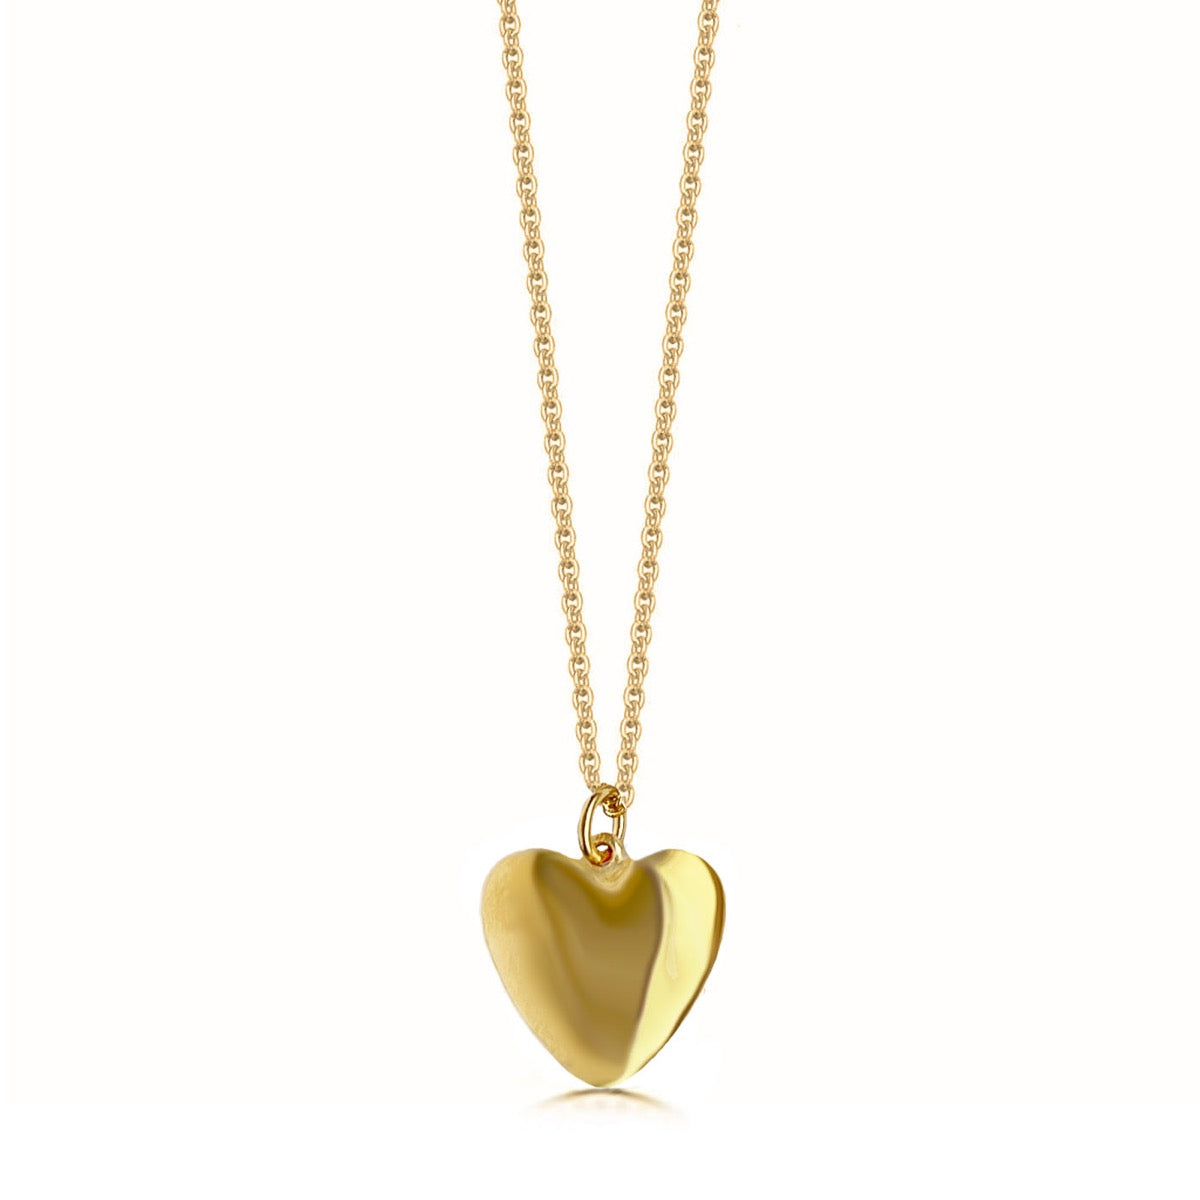 Deluxe Gold Plated & Sterling Silver Heart Necklace